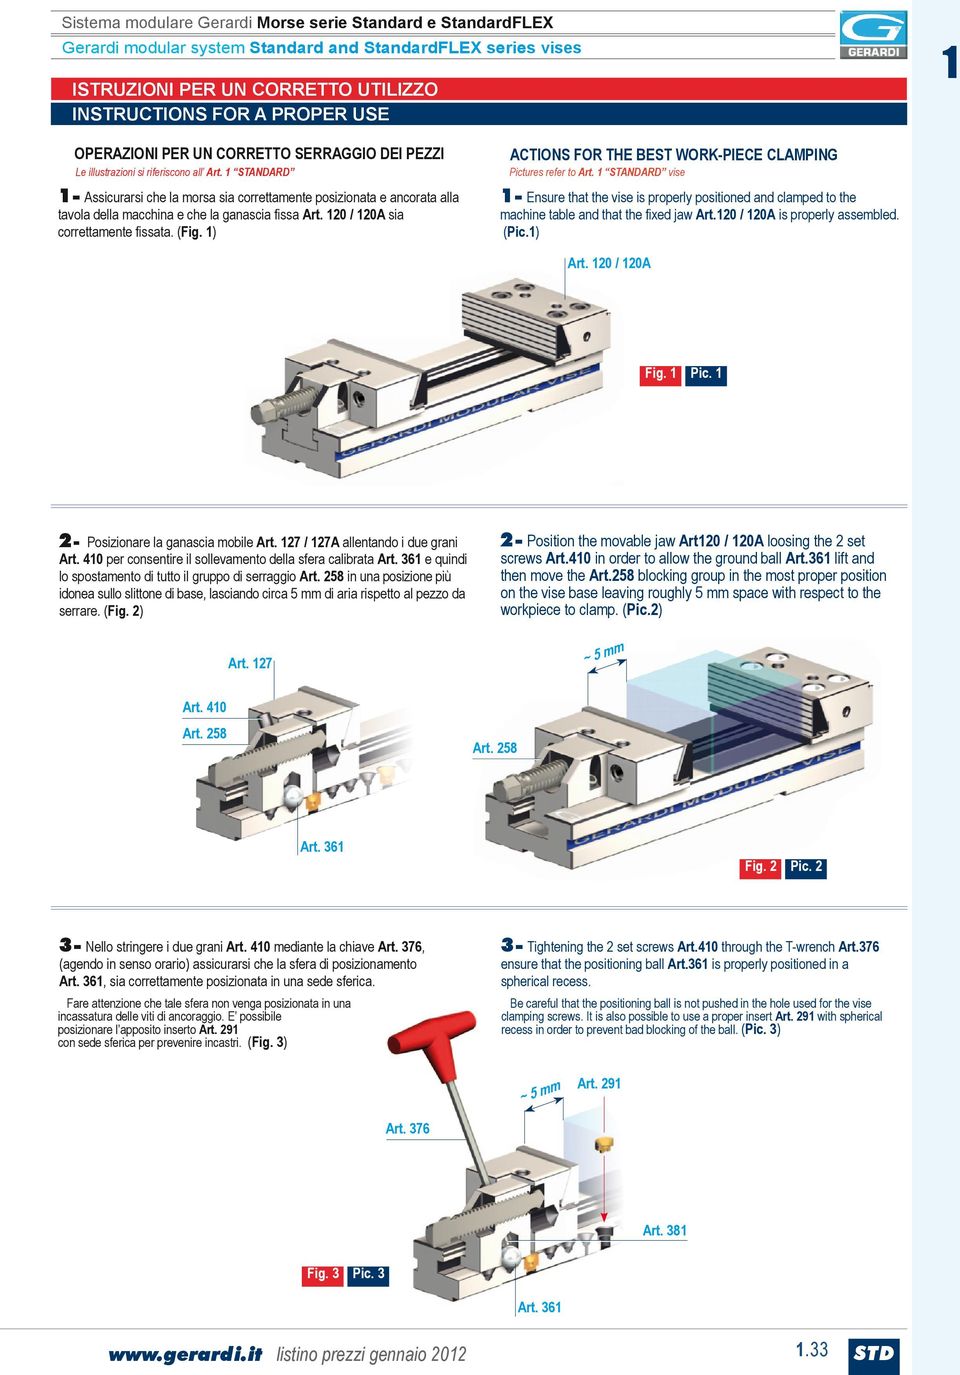 0 / 0 sia correttamente fissata. (Fig. ) ctions for the best workpiece clamping ictures refer to rt.